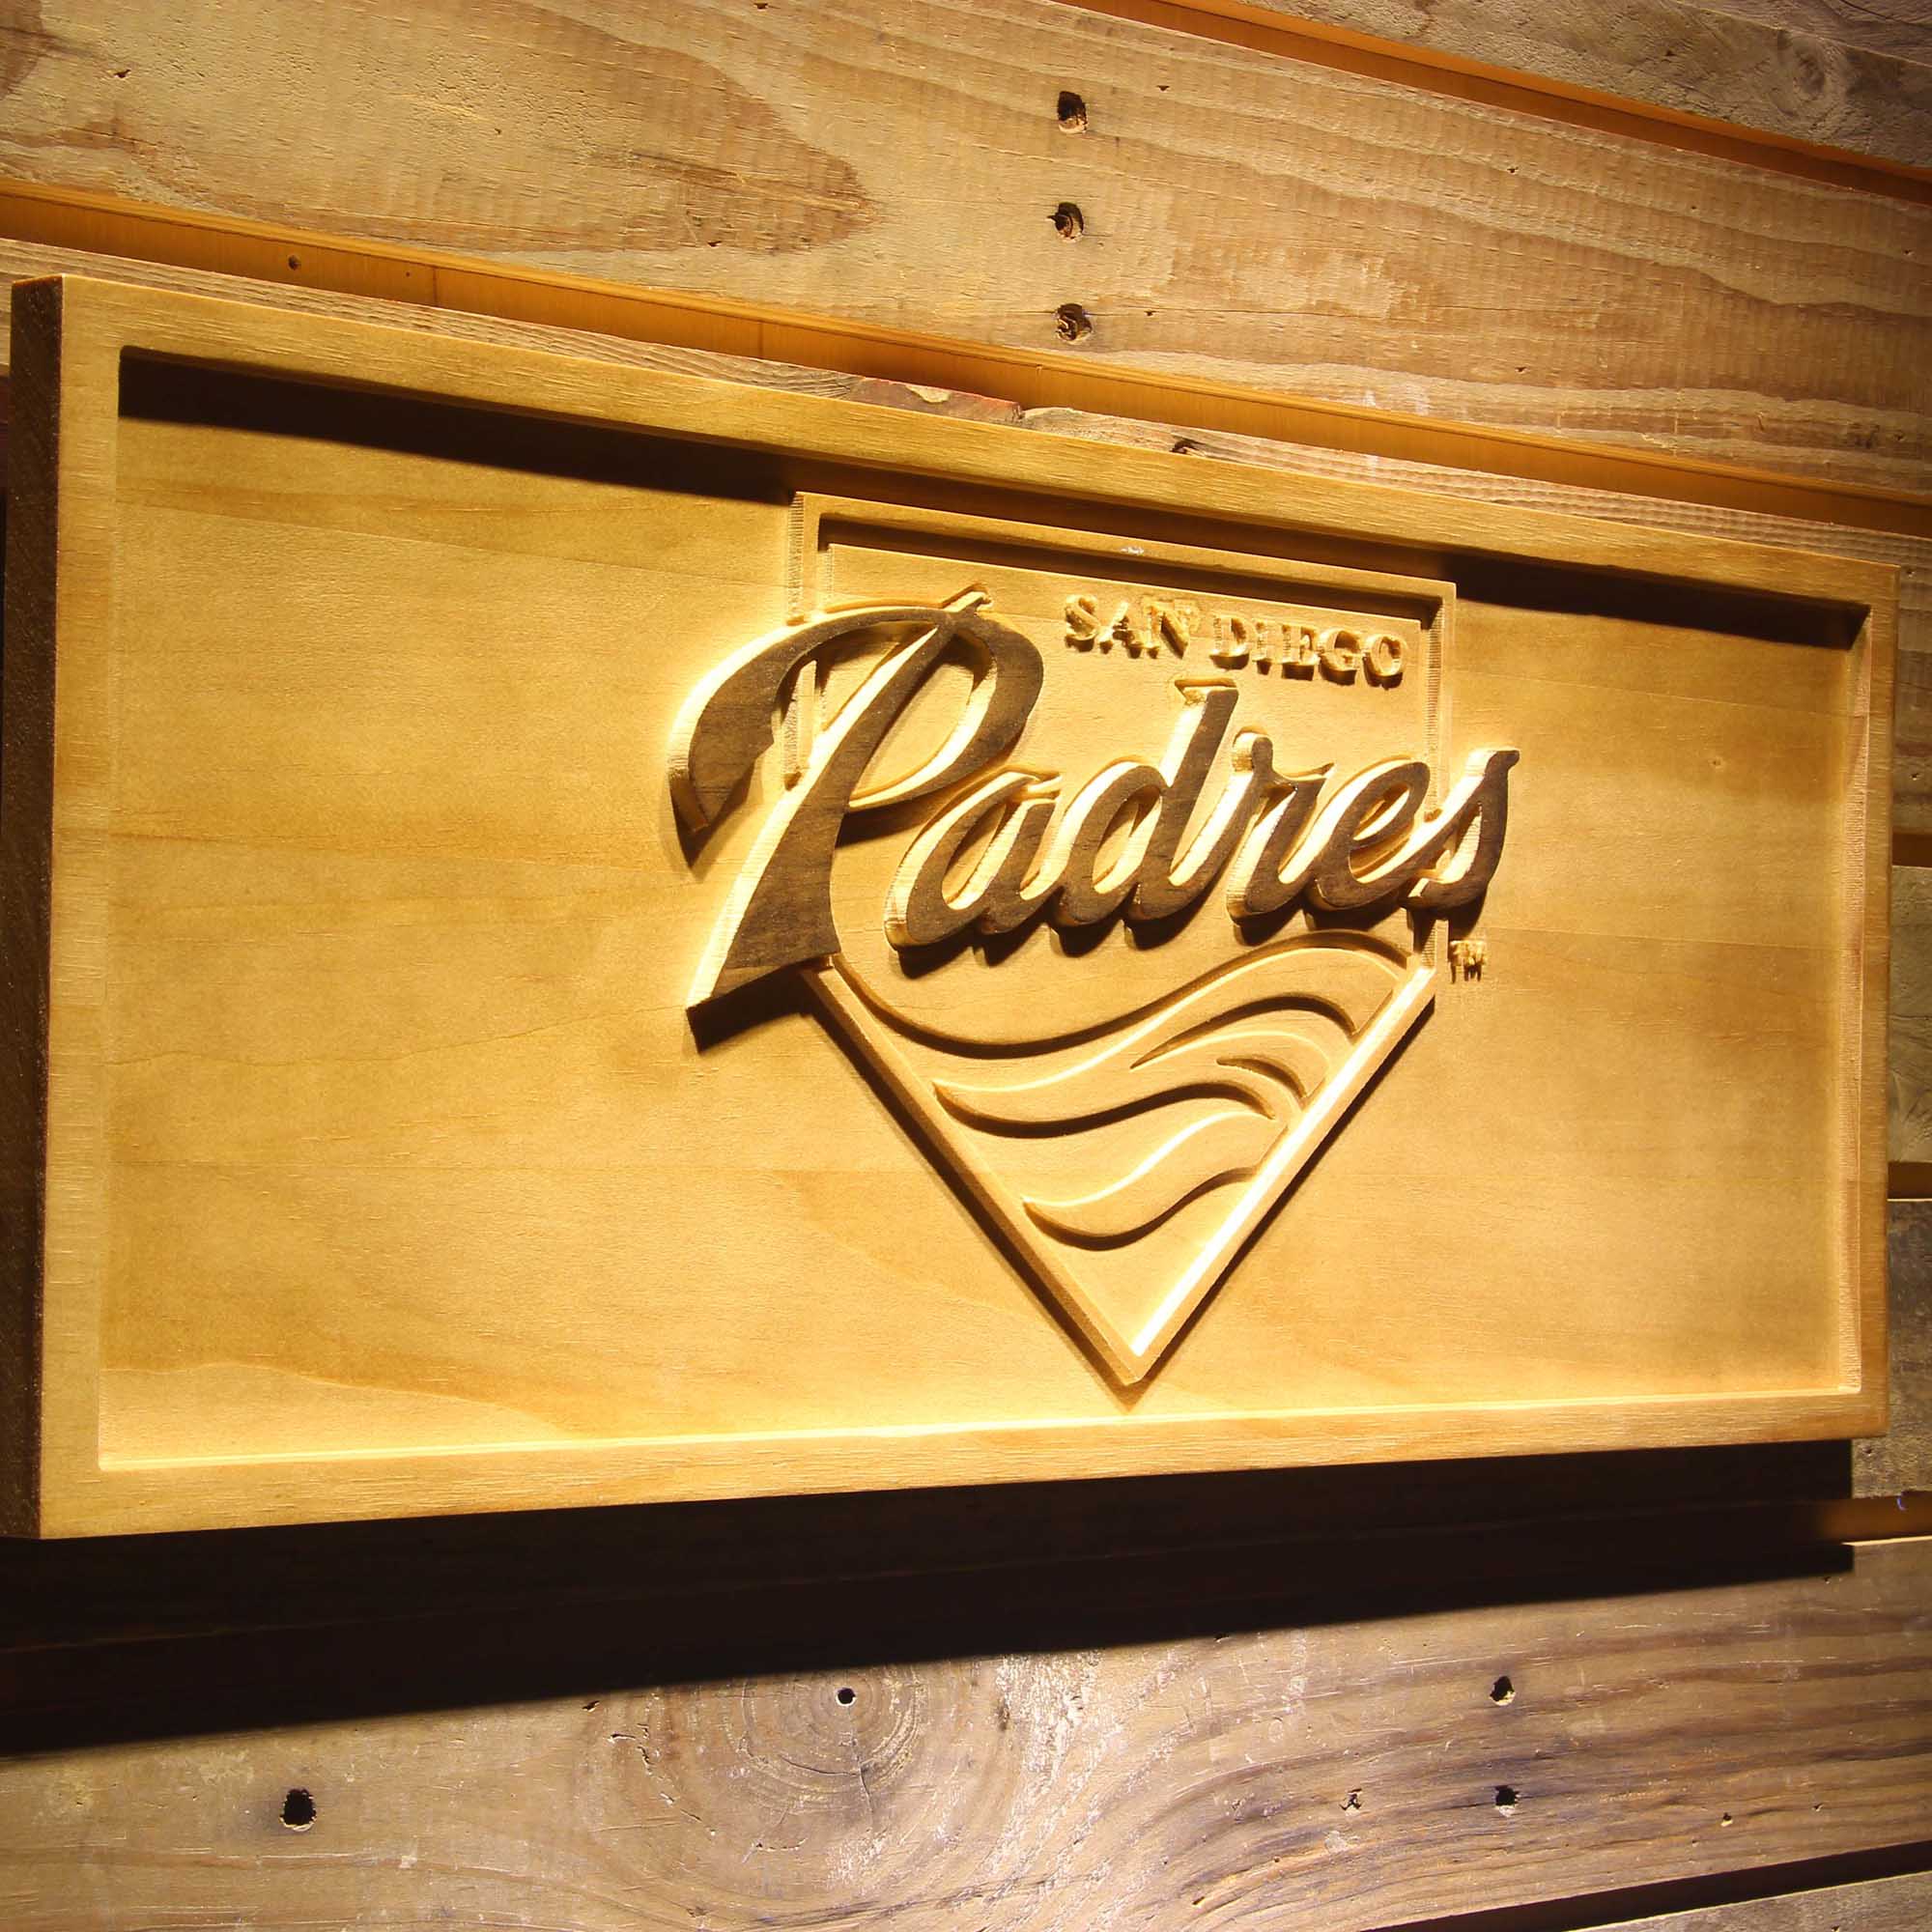 San Diego Padres 3D Wooden Engrave Sign